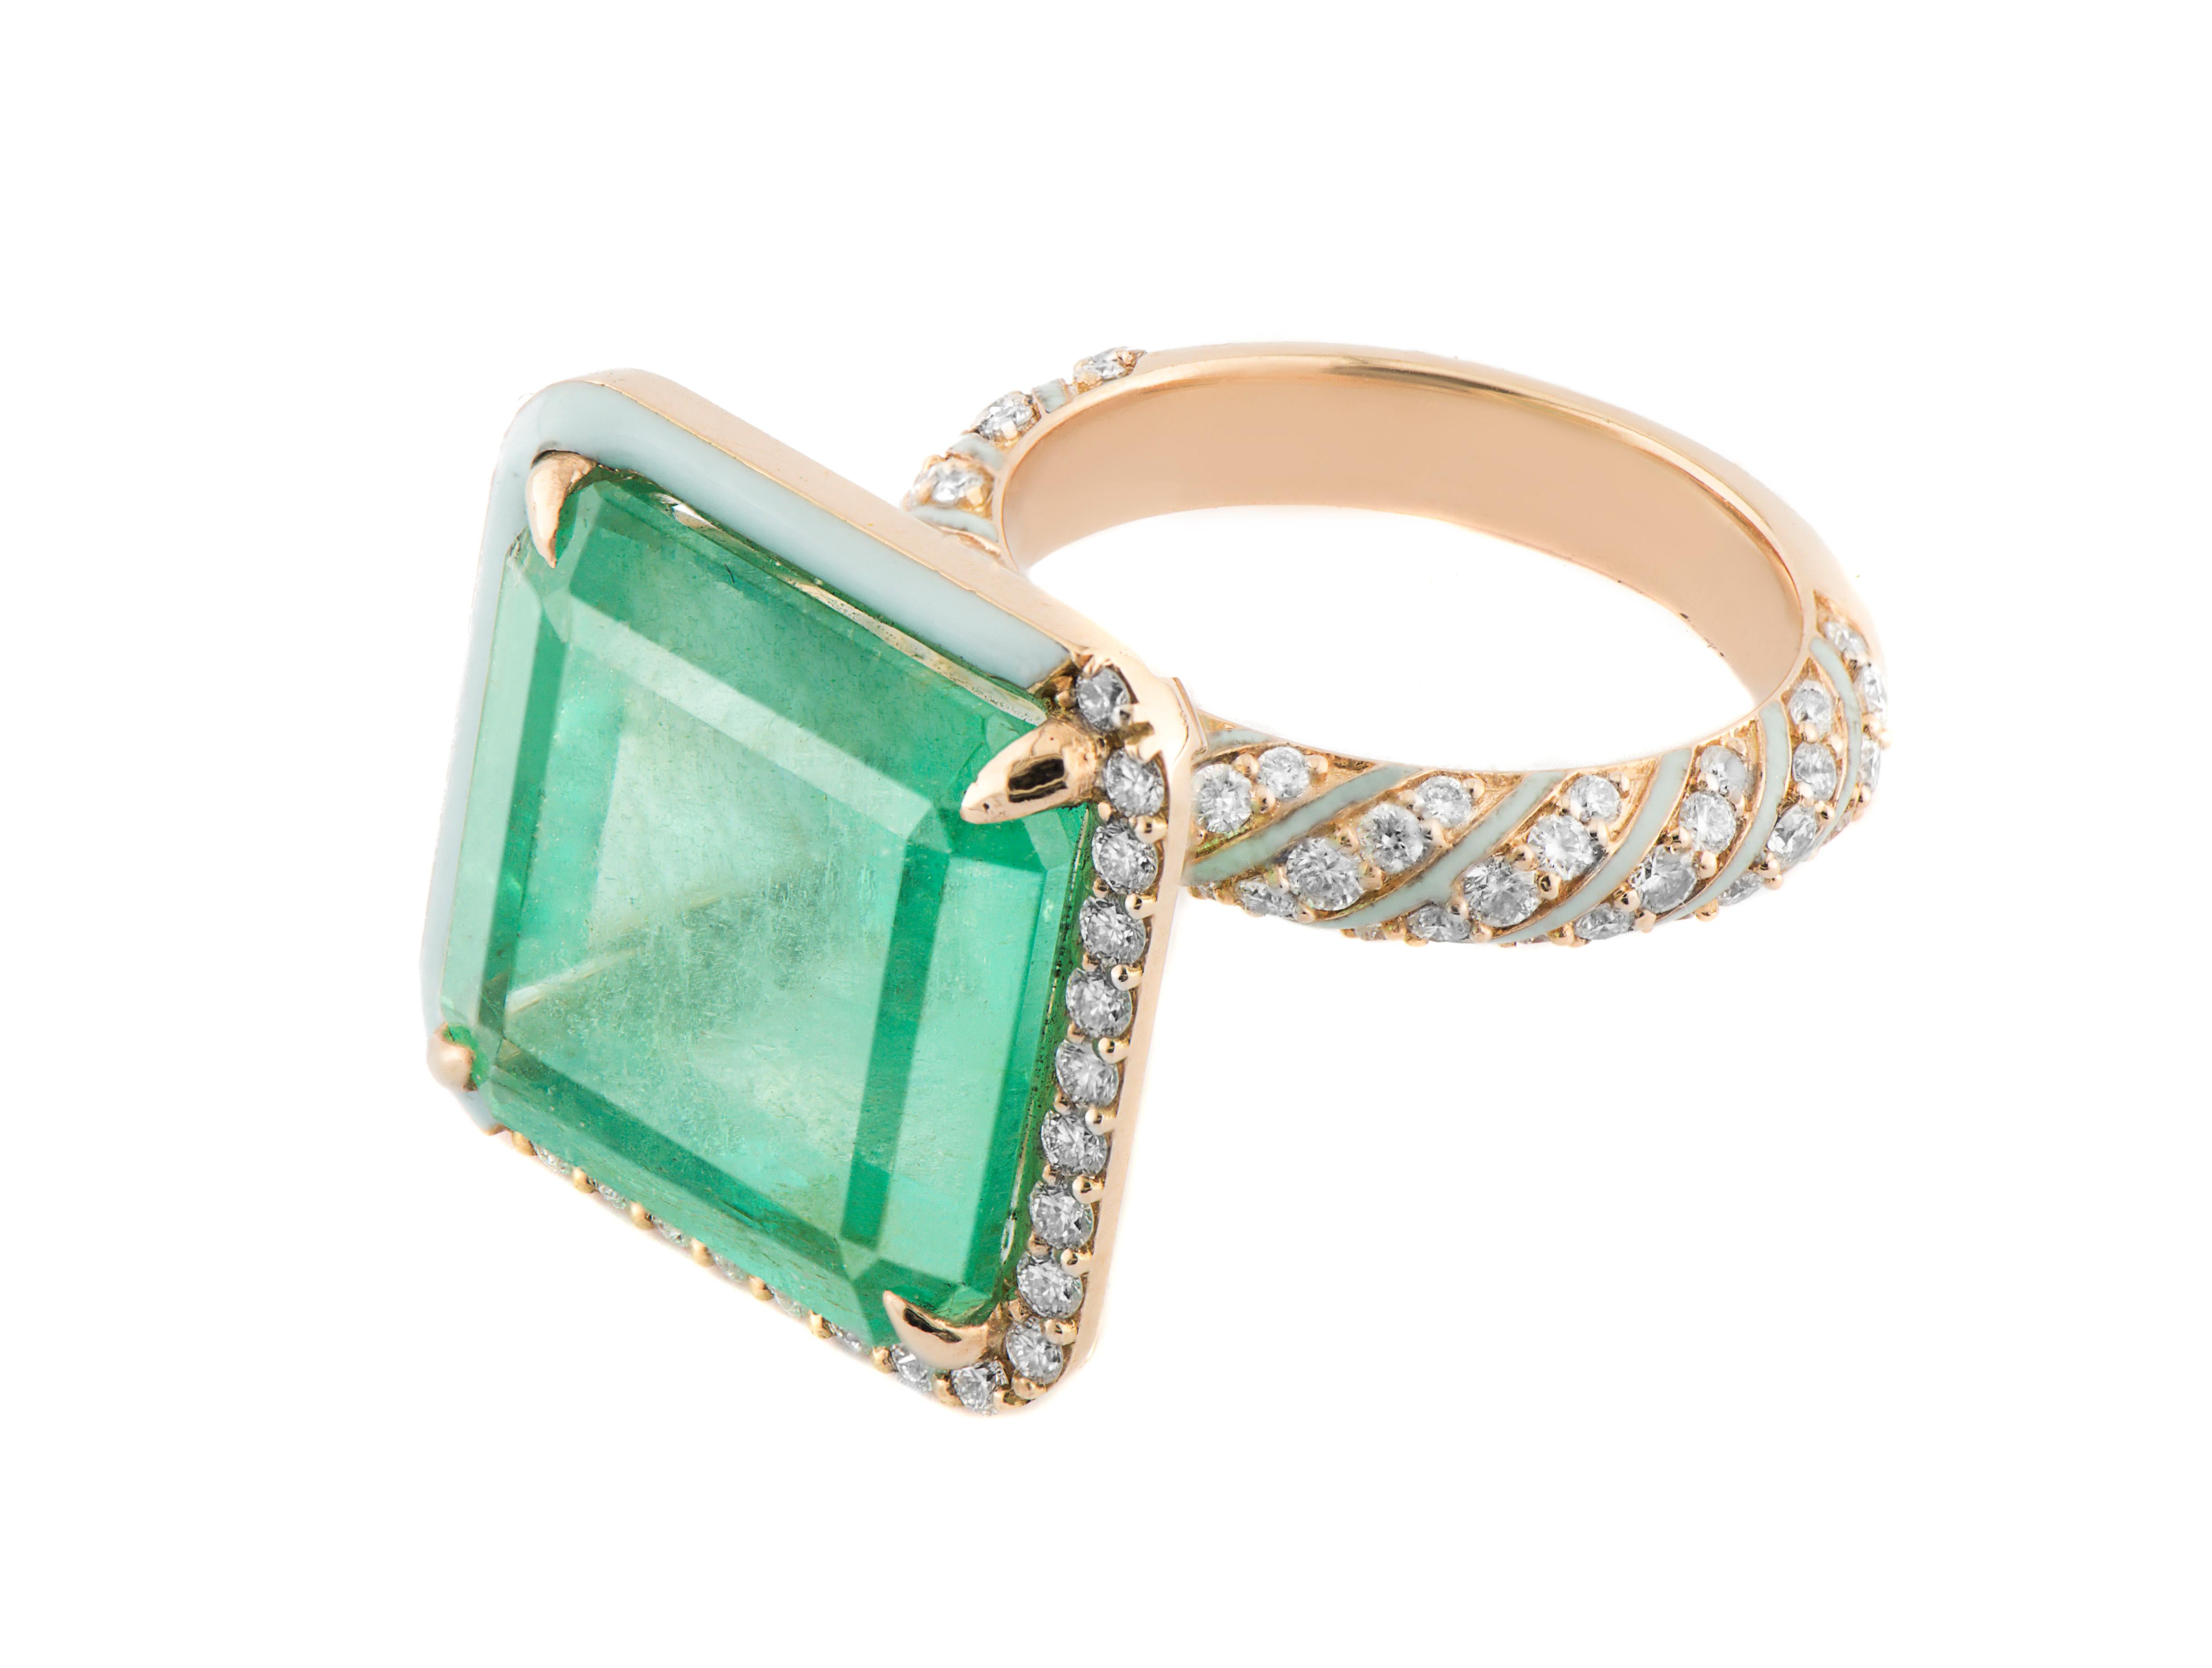 15.44 carat natural Zambian Emerald, encased with 2 sides of Enamel and a pave diamond border. With extra detailing with white enamel stripes and pave diamond stripes. This ring is in 2.64 grams of 18K rose gold.

